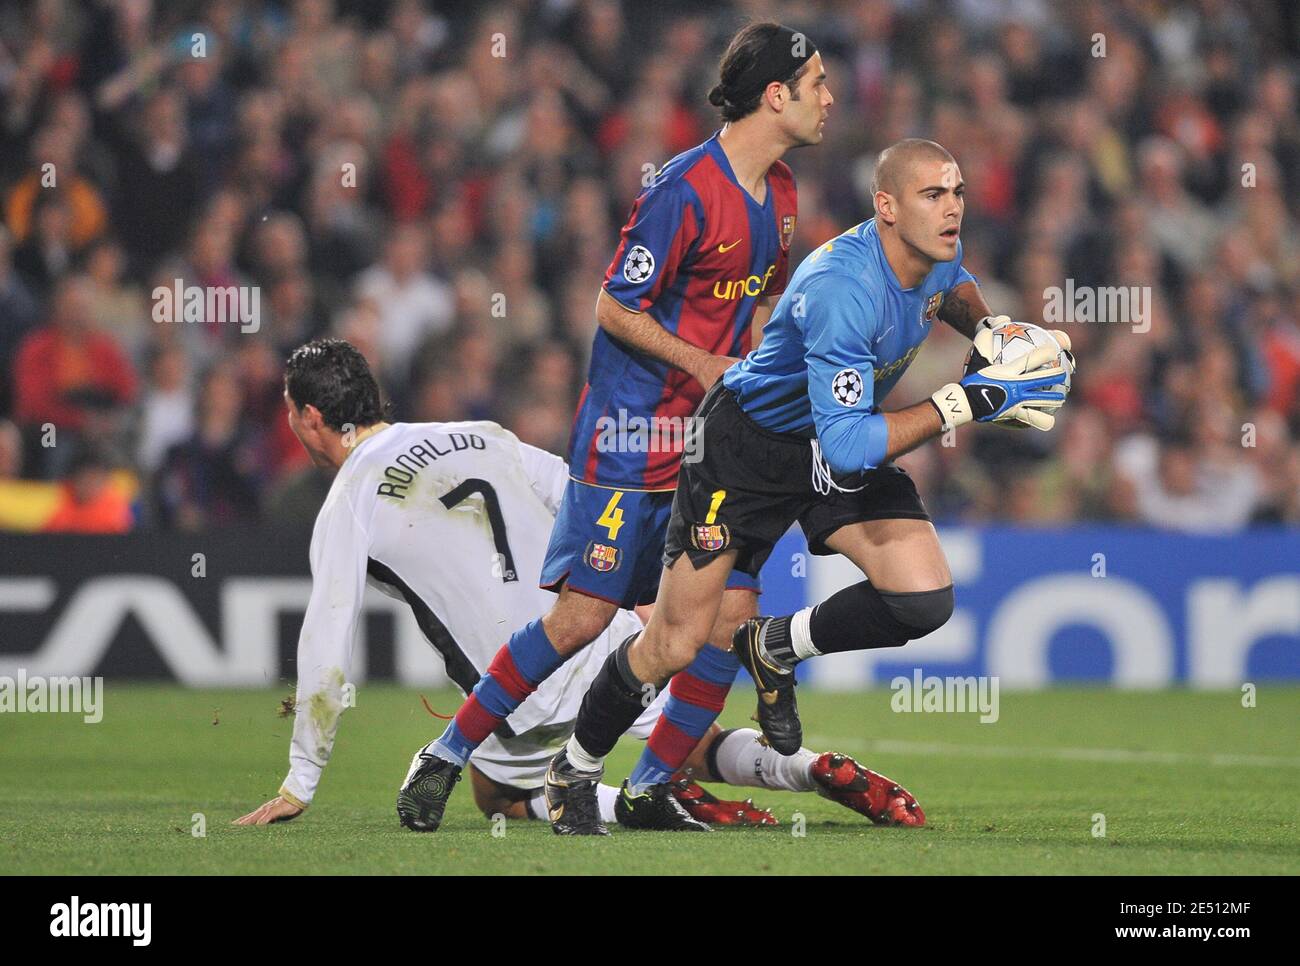 Barcelona's goalkeeper Victor Valdes during the UEFA Champions League semi-finals, first leg, Soccer match, FC Barcelona vs Manchester United at the Nou Camp stadium in Barcelona, Spain on April 23, 2008. The match ended in a 0-0 draw. Photo by Steeve McMay/Cameleon/ABACAPRESS.COM Stock Photo